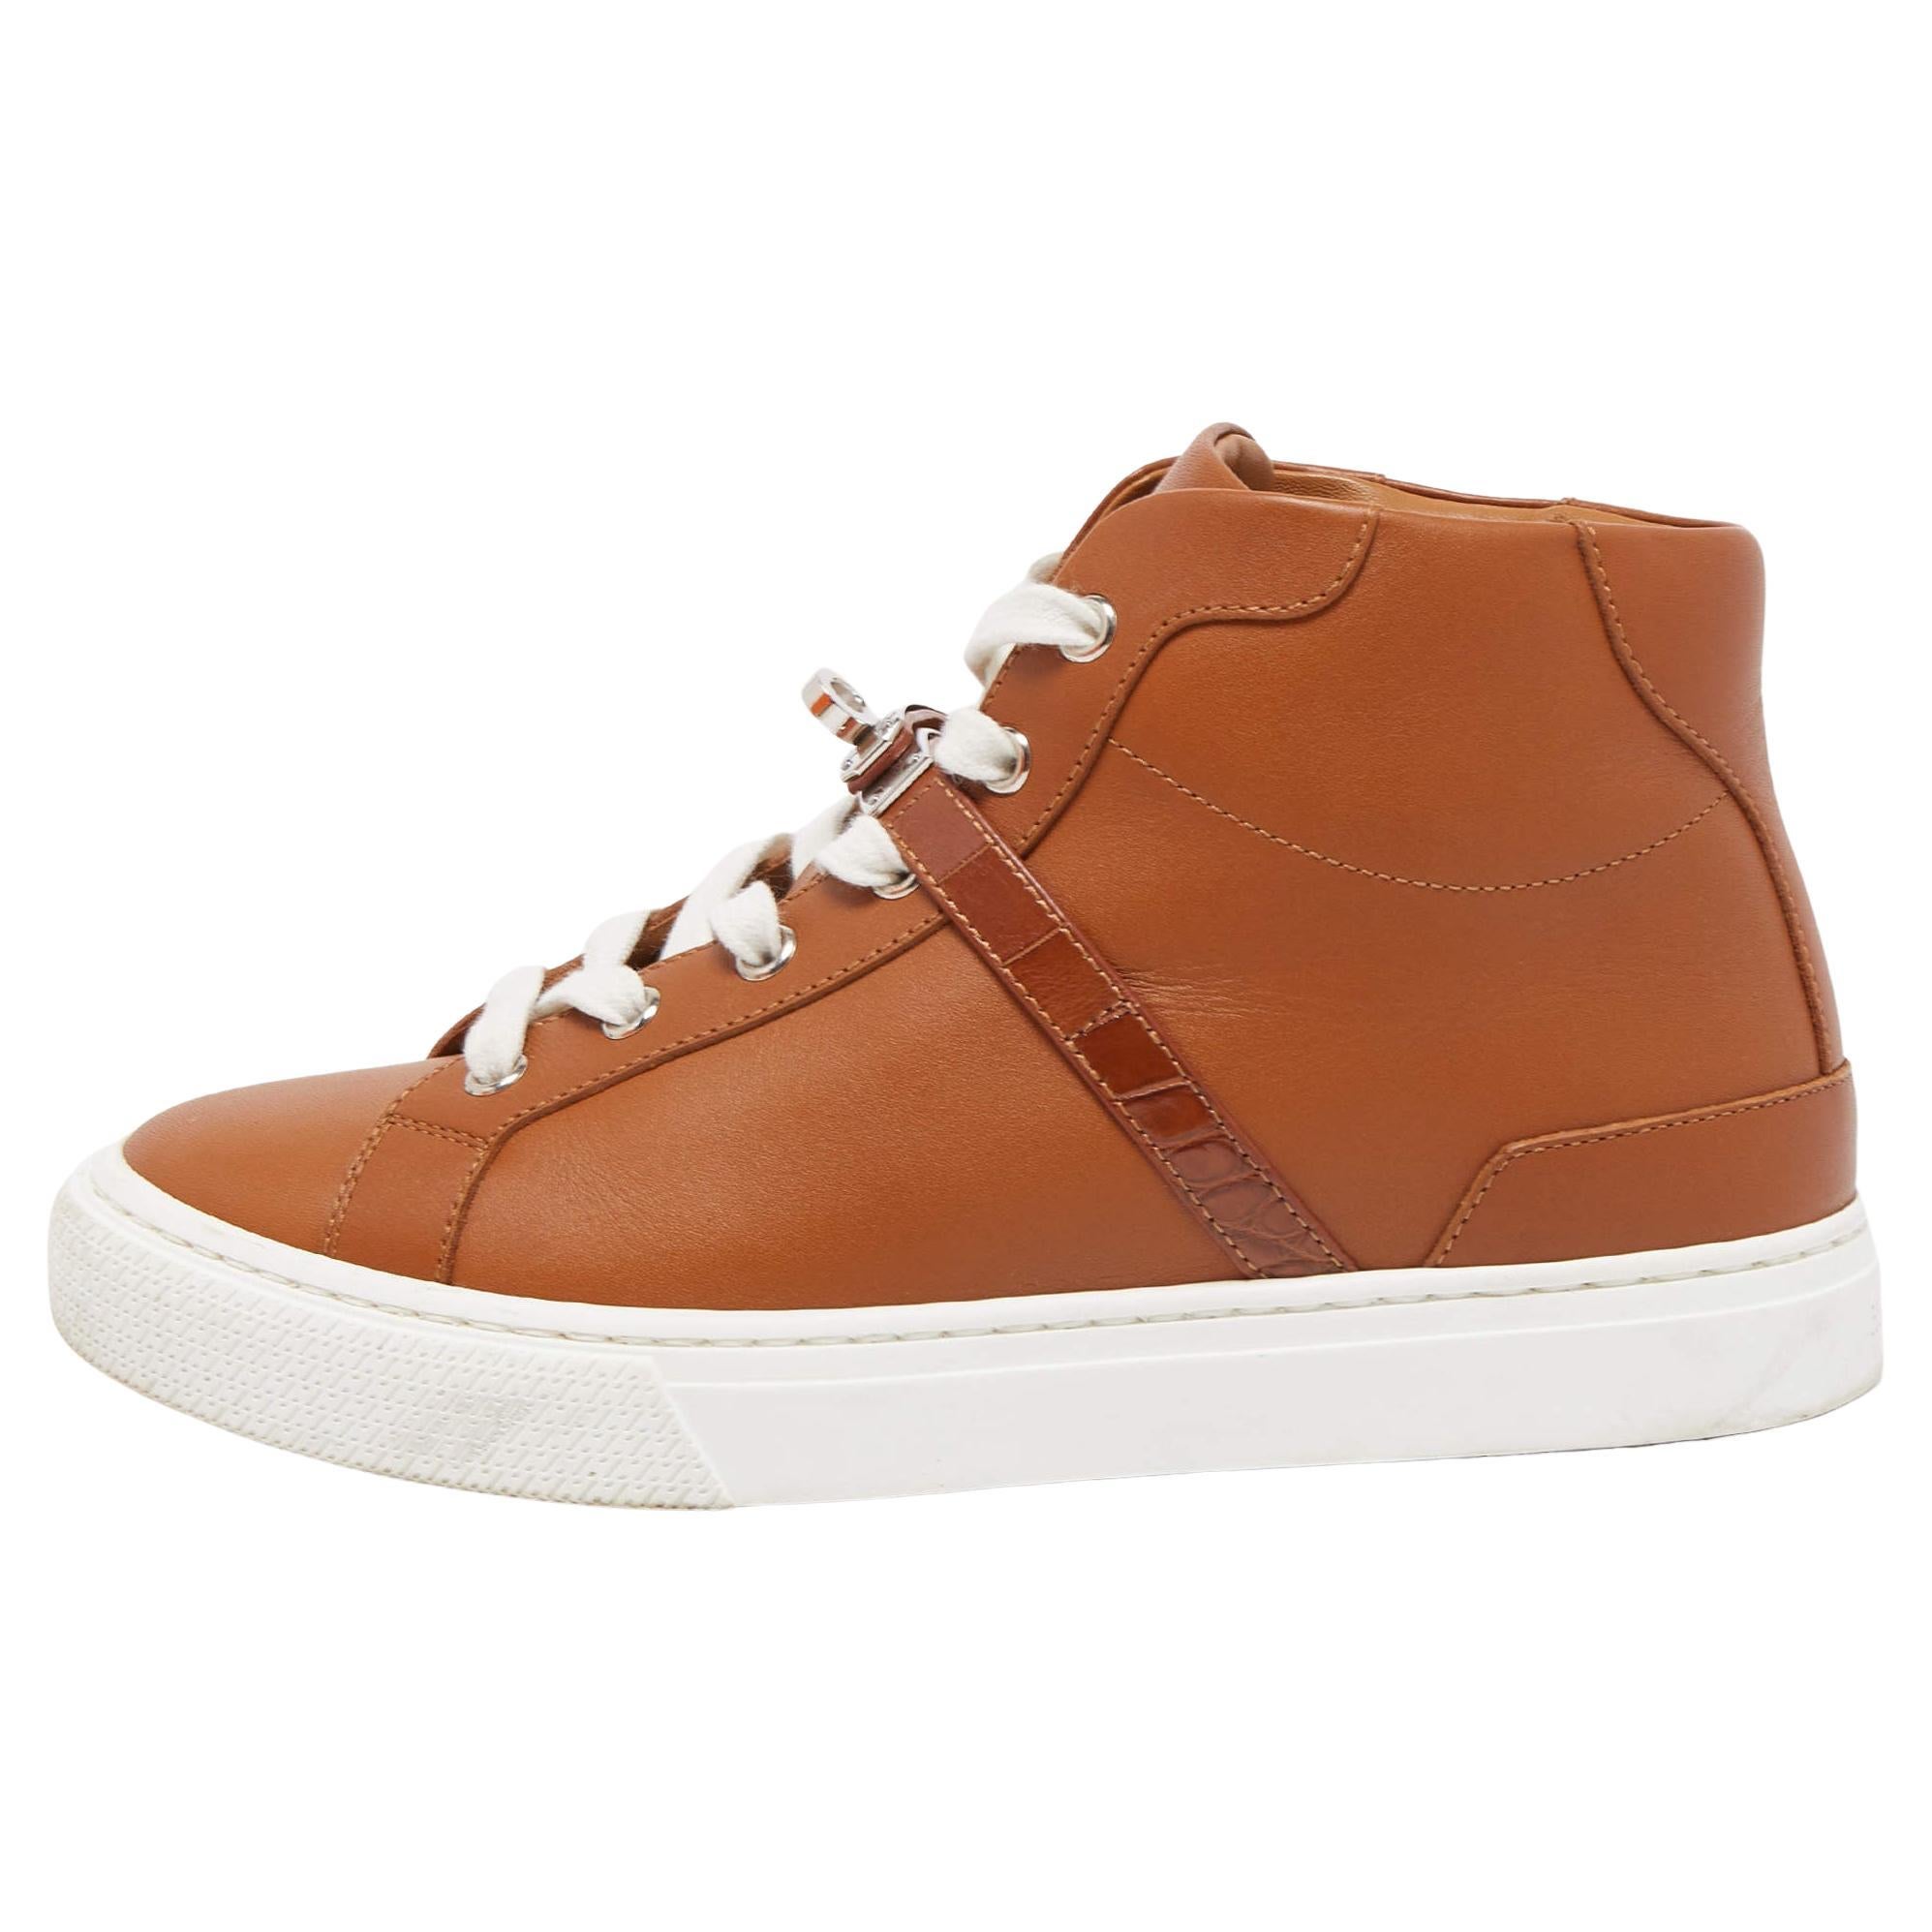 Hermes Brown Leather Daydream High Top Sneakers Size 37.5